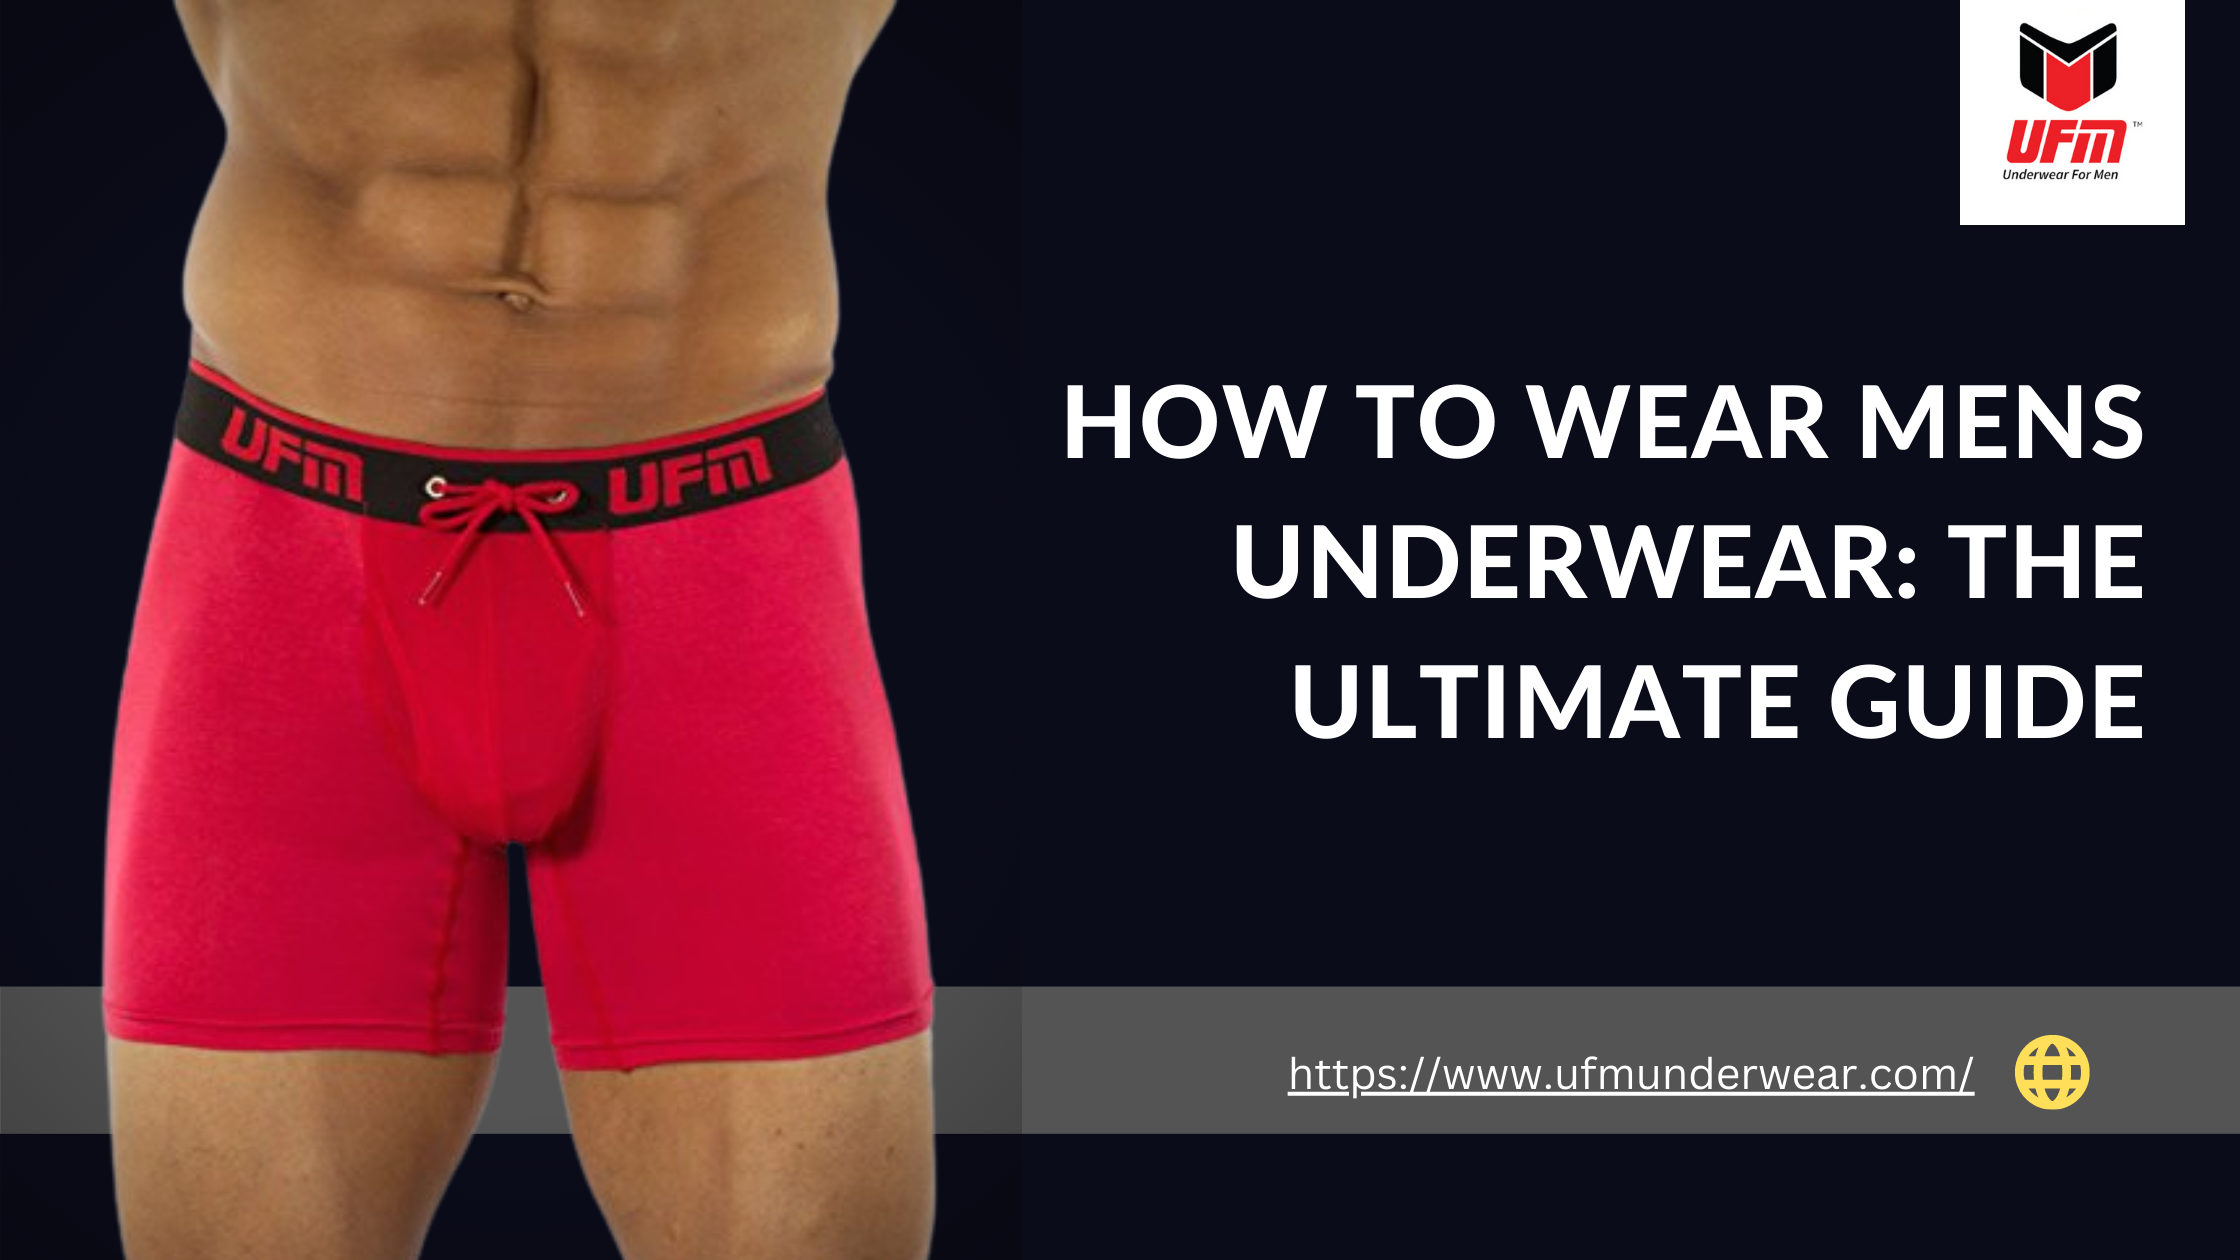 I refuse to wear underwear to the gym - I don't care if people